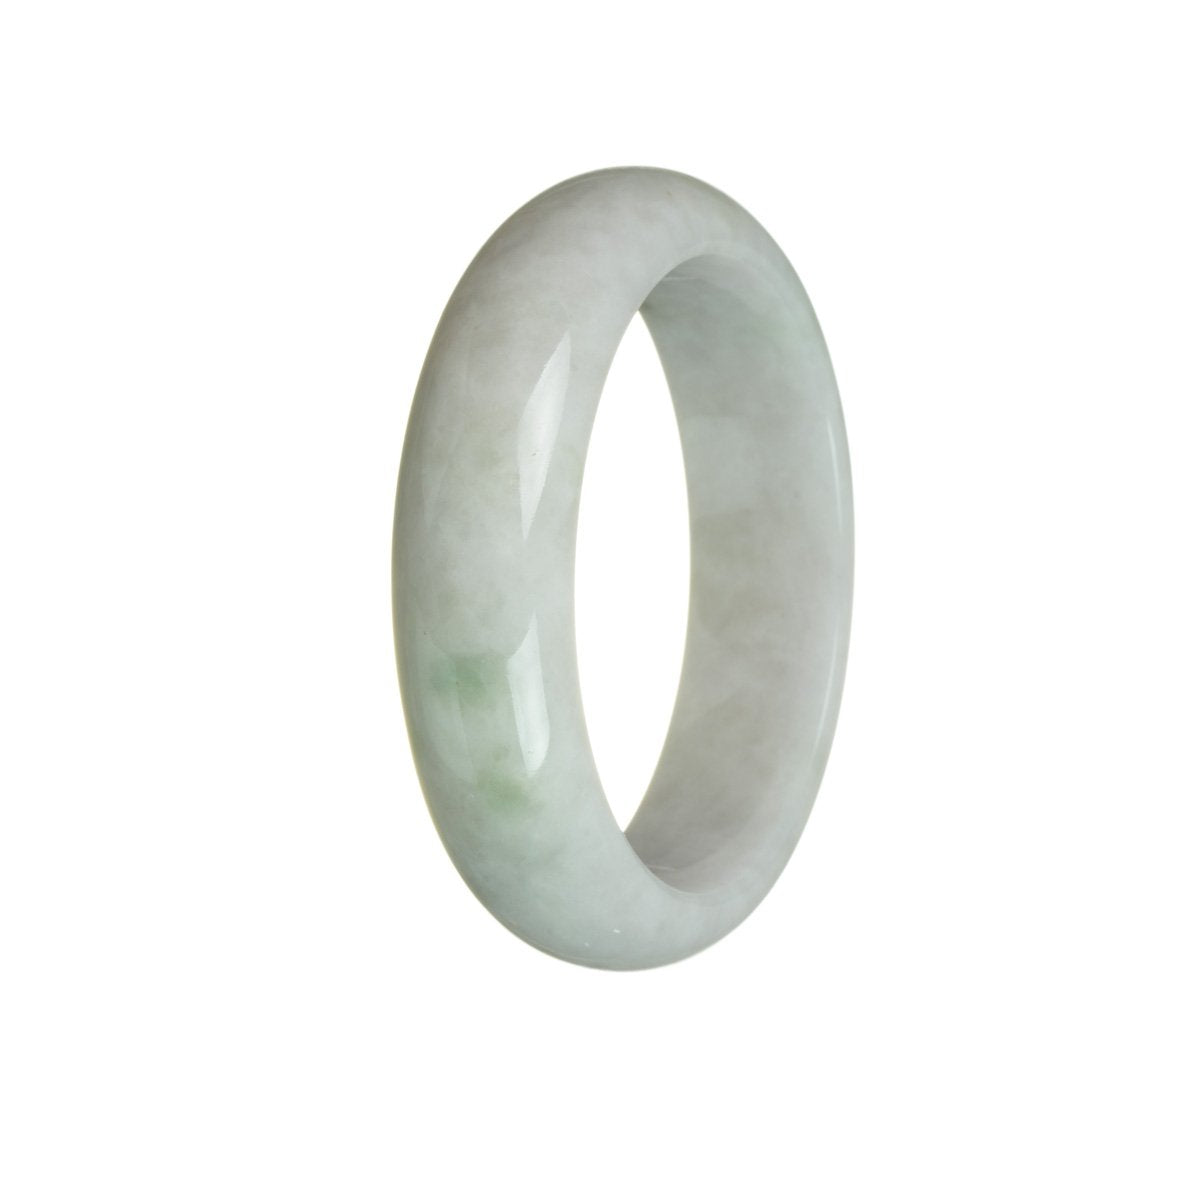 A stunning lavender jadeite bangle bracelet with a half moon shape, measuring 58mm in diameter. Perfect for adding a touch of elegance and sophistication to any outfit.